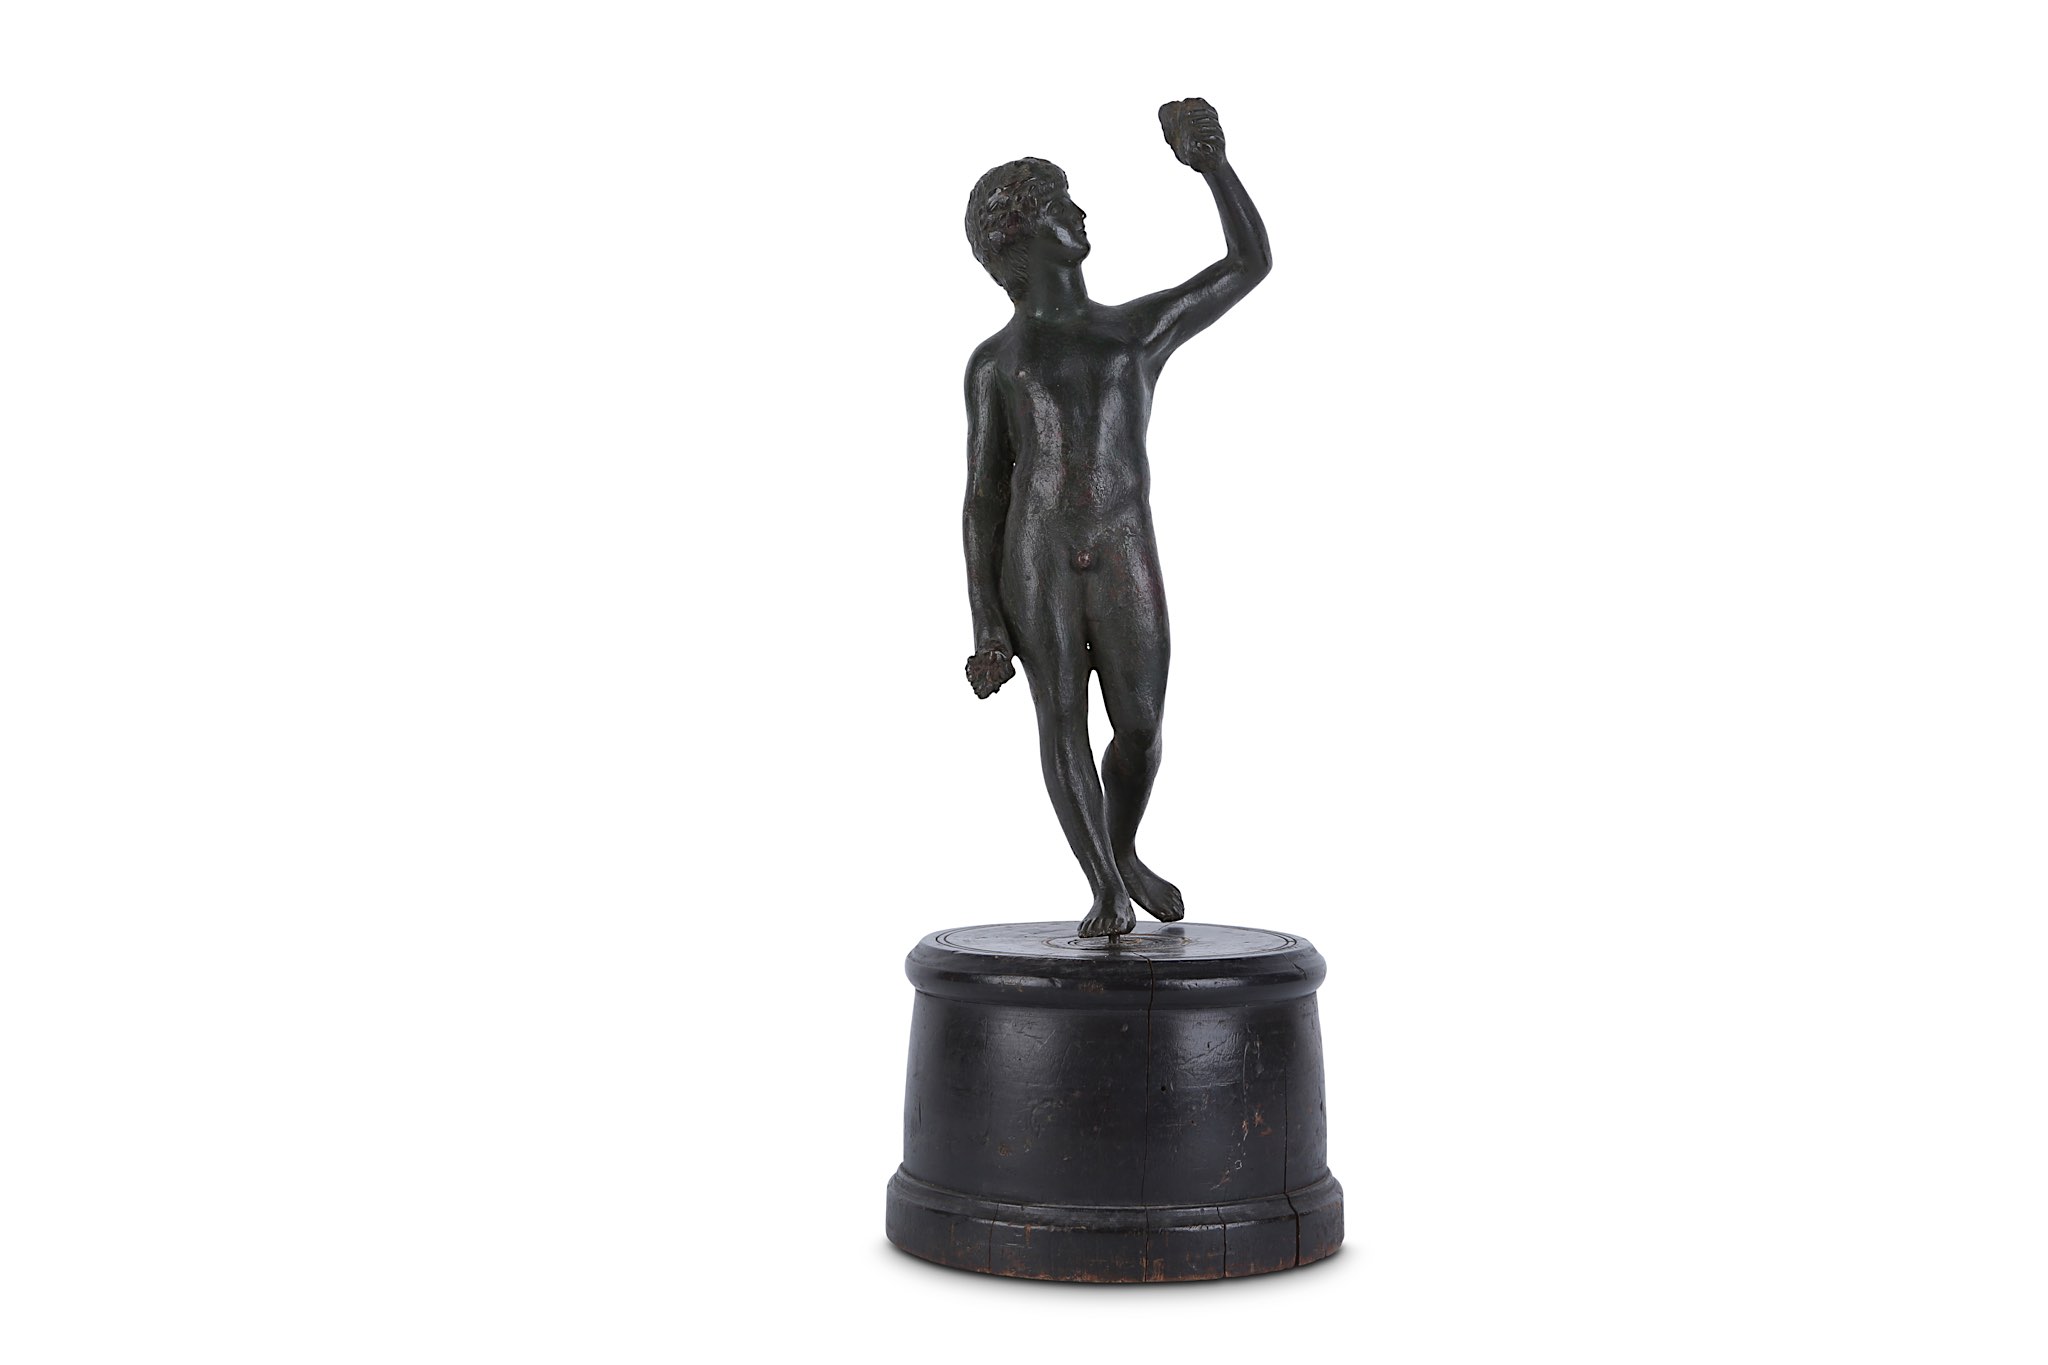 AFTER THE ANTIQUE: A SMALL BRONZE STATUETTE OF BACCHUS, PROBABLY 18TH CENTURY the standing figure